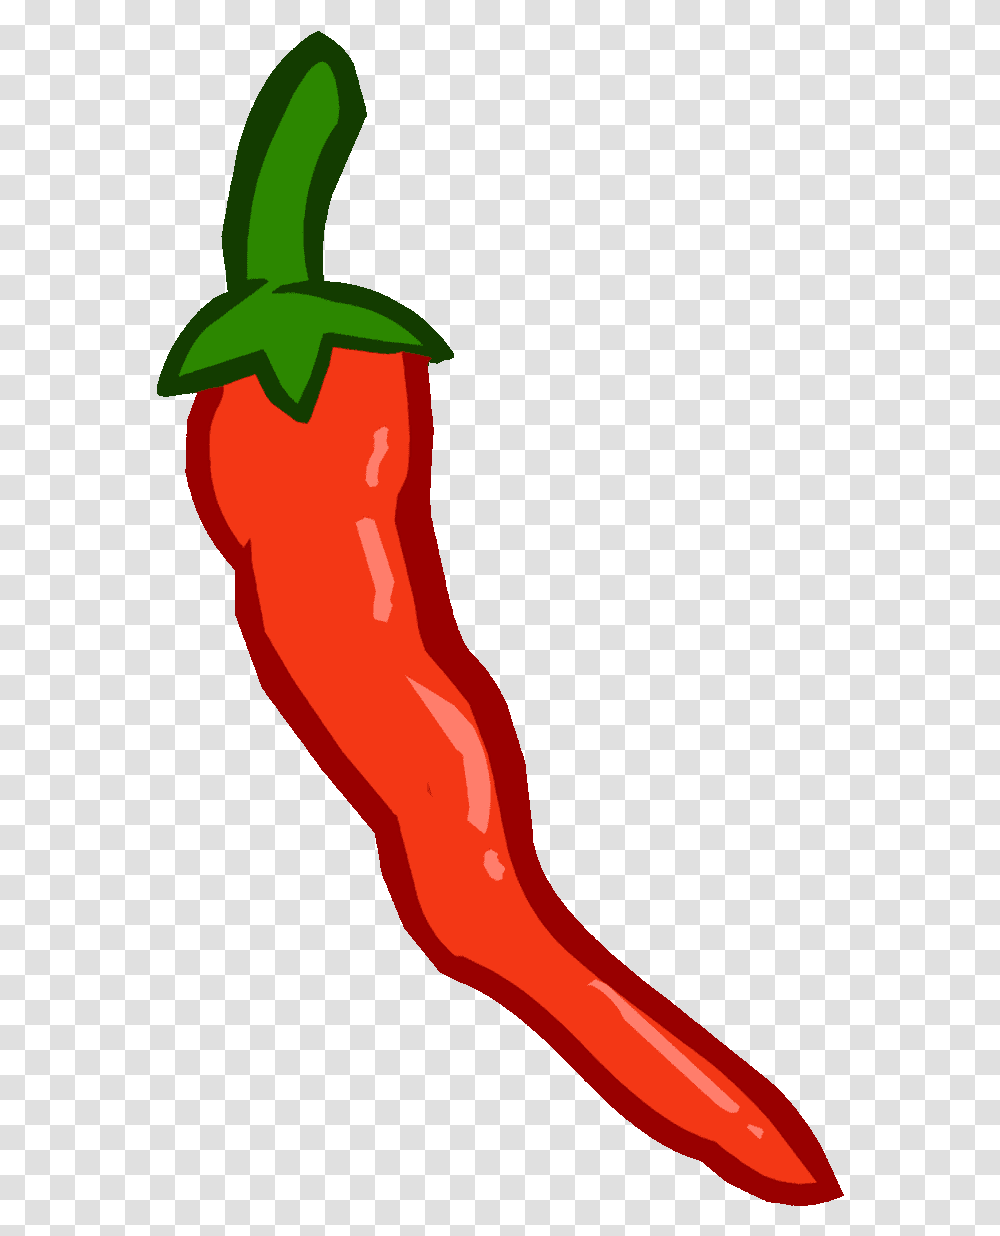 Download 17 Stunning Chili Pepper Clipart Chili Peppe Clip Art, Food, Plant, Vegetable, Ketchup Transparent Png